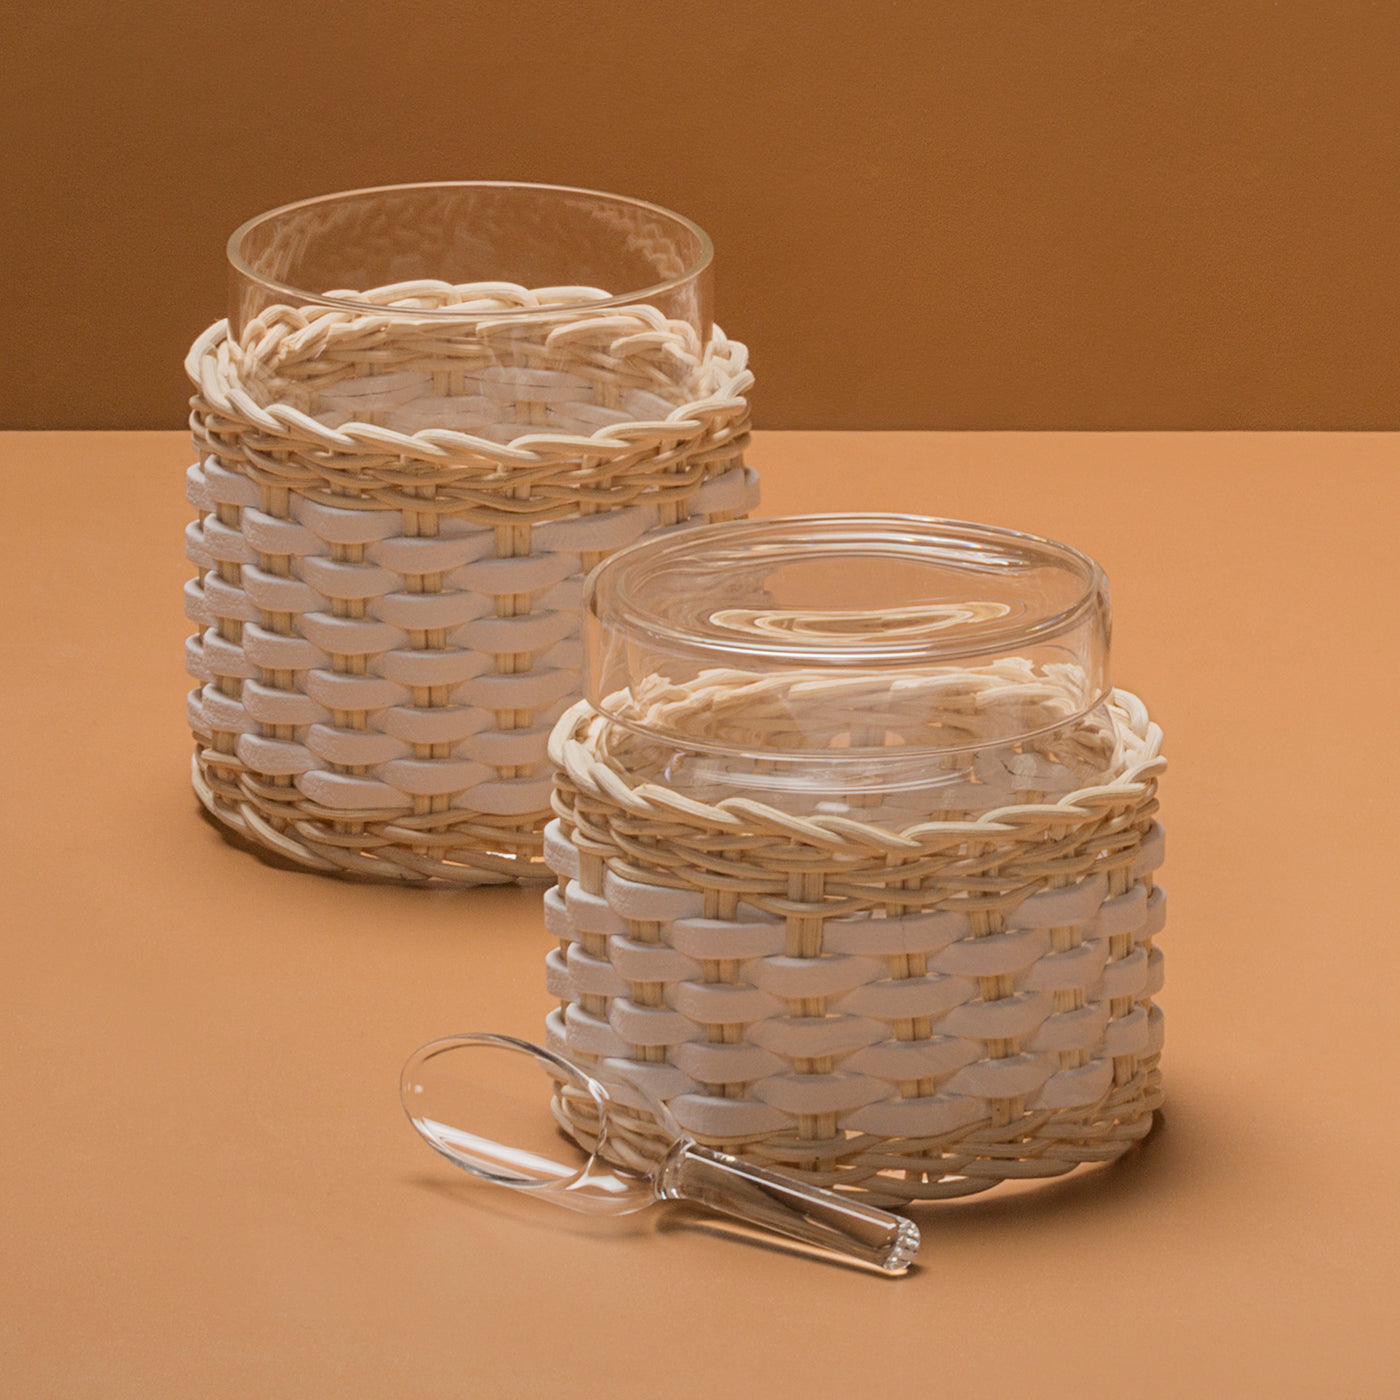 Wideville Leather & Rattan Candleholder - White - Alternative view 1